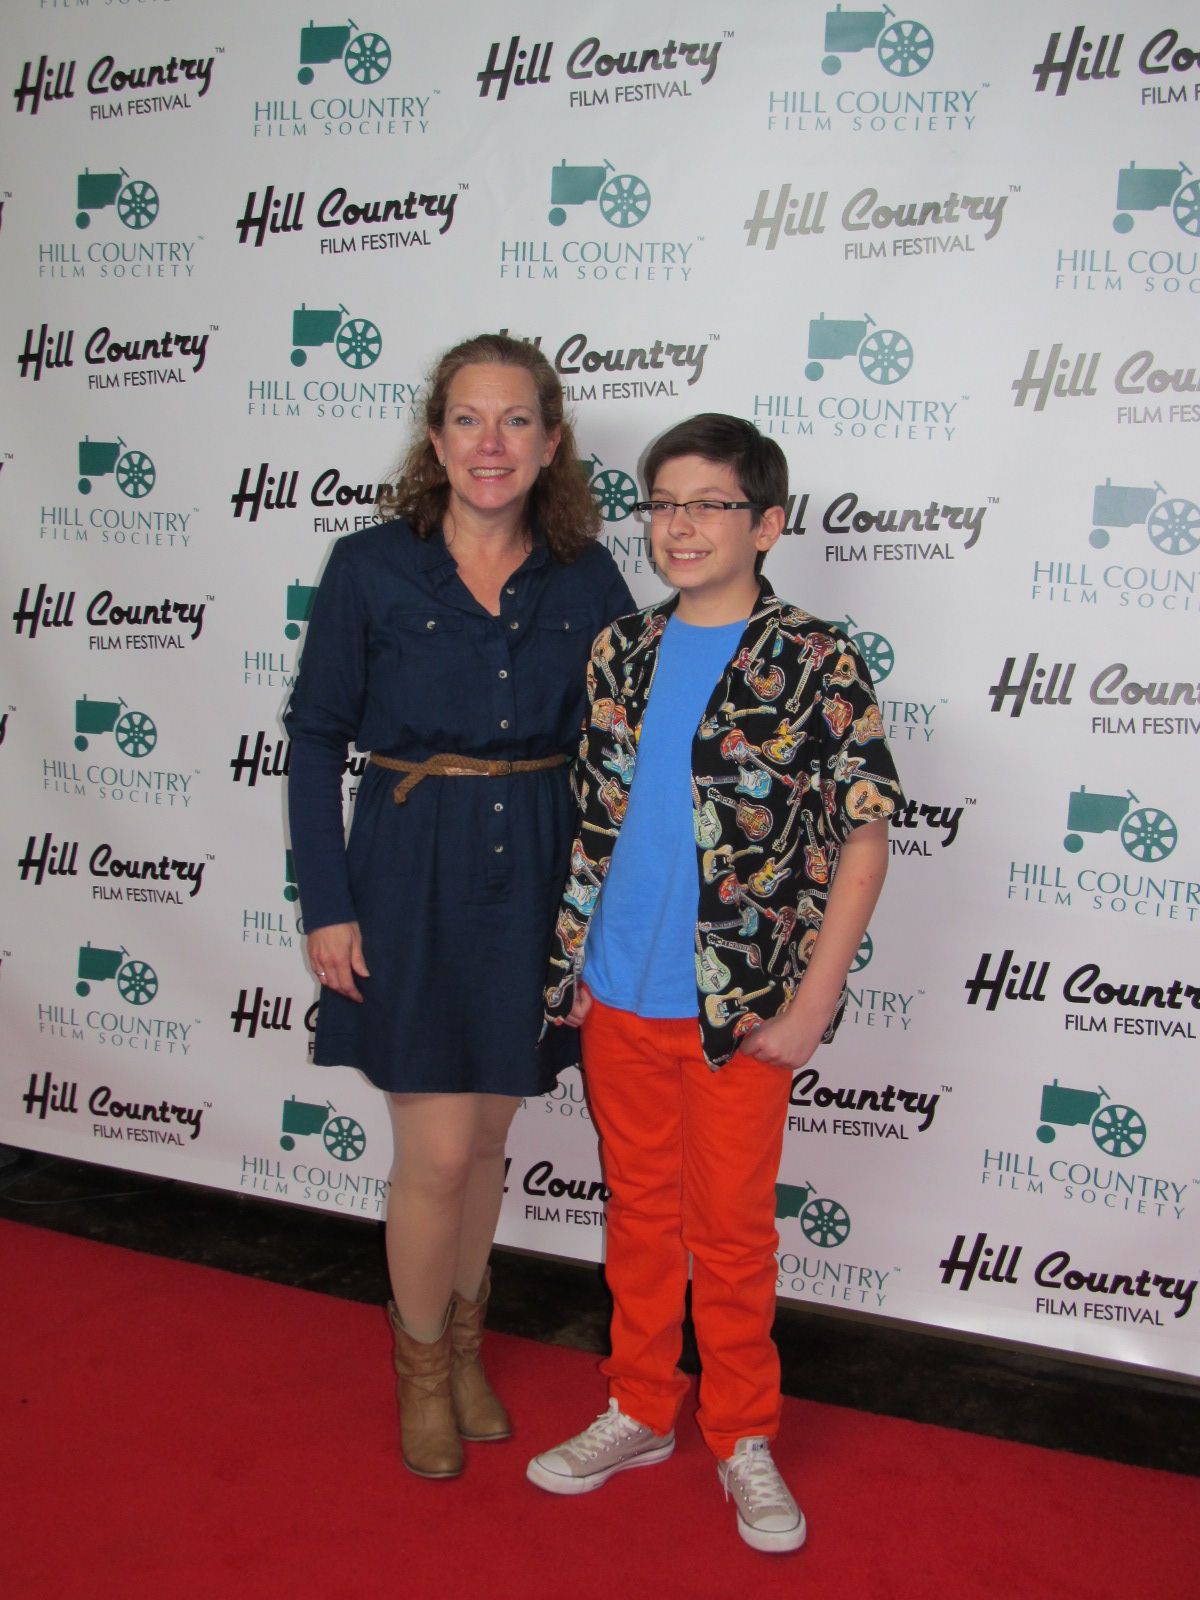 Peggy Schott and Evan Materne at the Texas Premiere of Detention